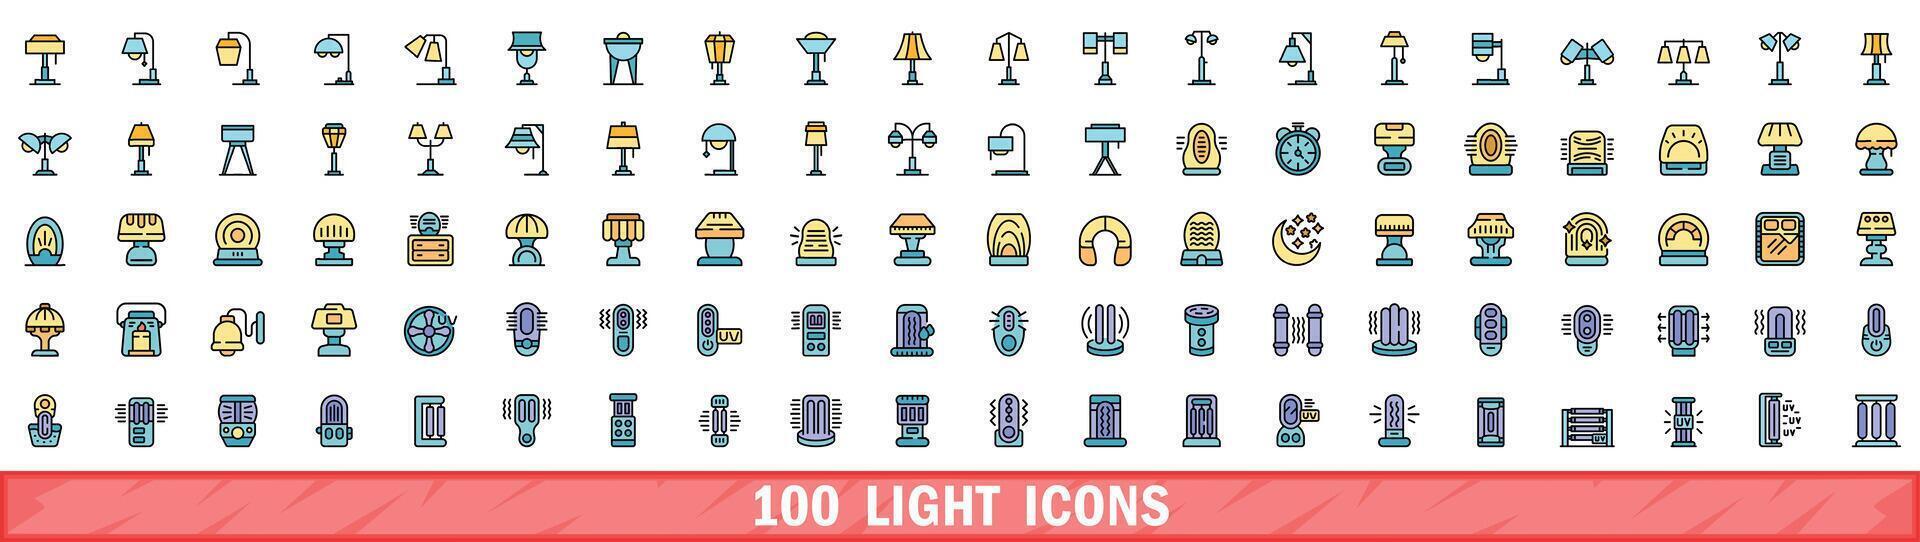 100 light icons set, color line style vector